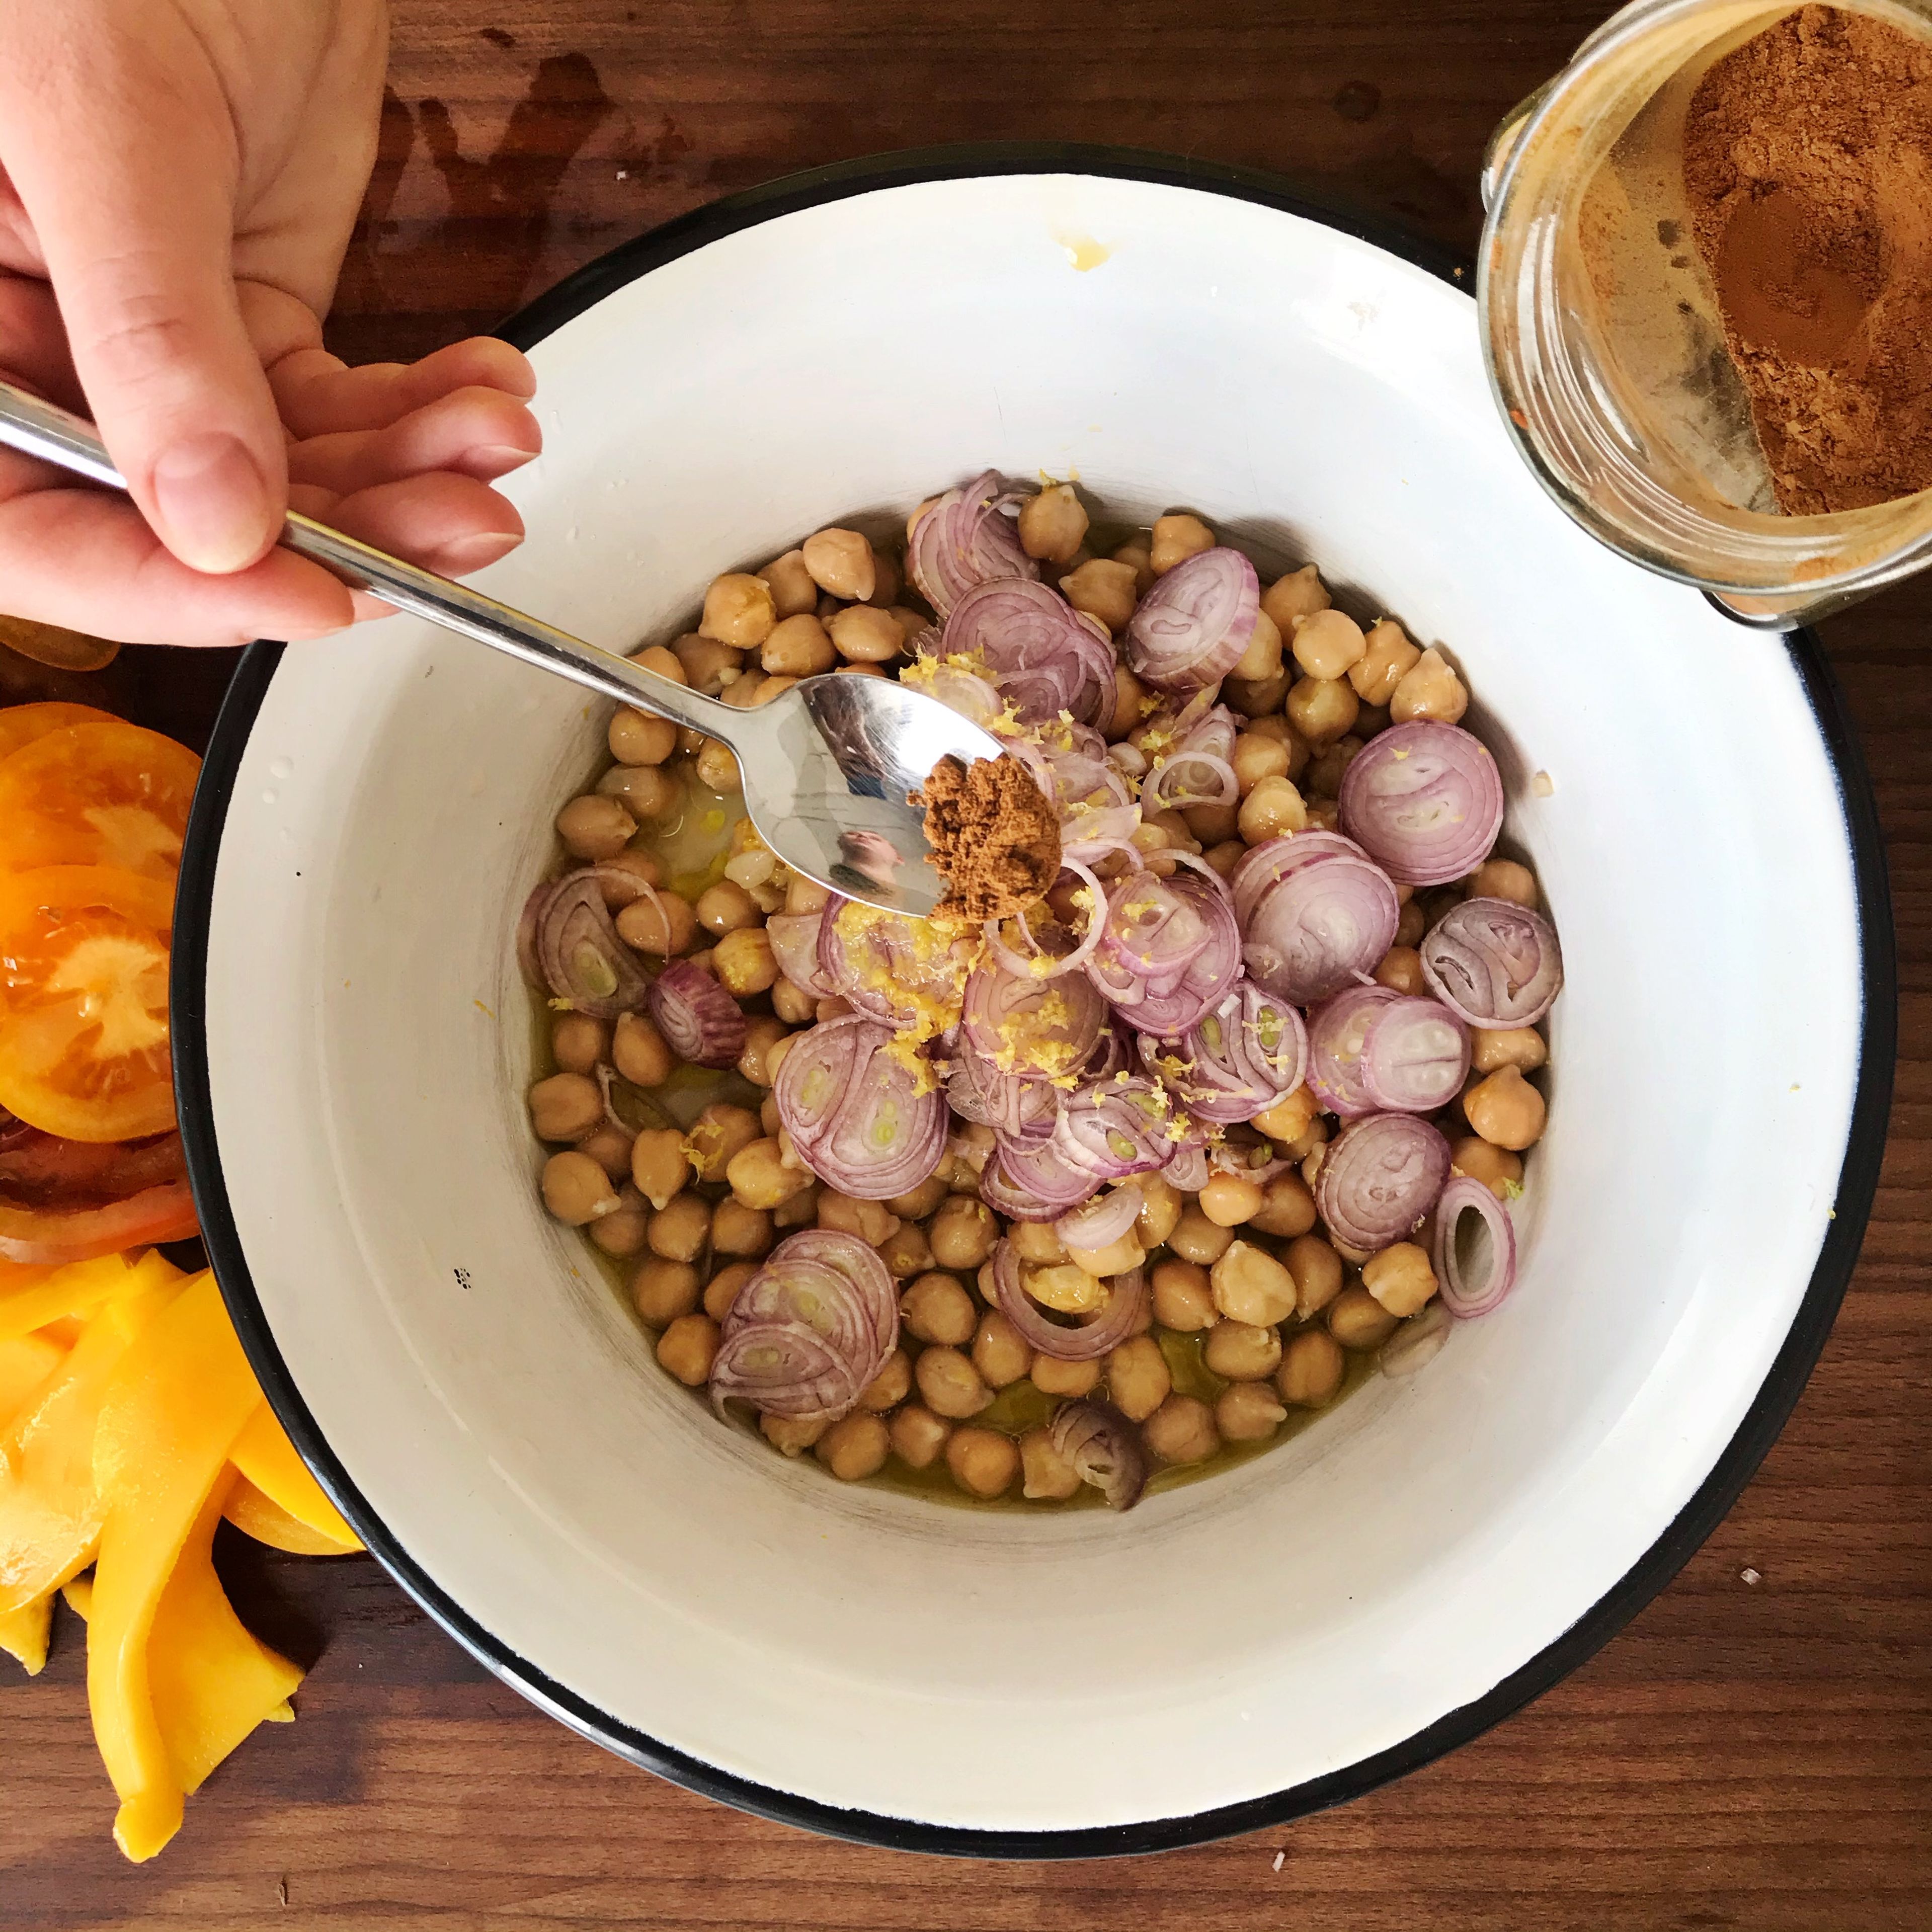 Mix the chickpeas in a bowl with olive oil, cinnamon, the juice and zest of one lemon and the shallot rings. Season with salt and pepper.